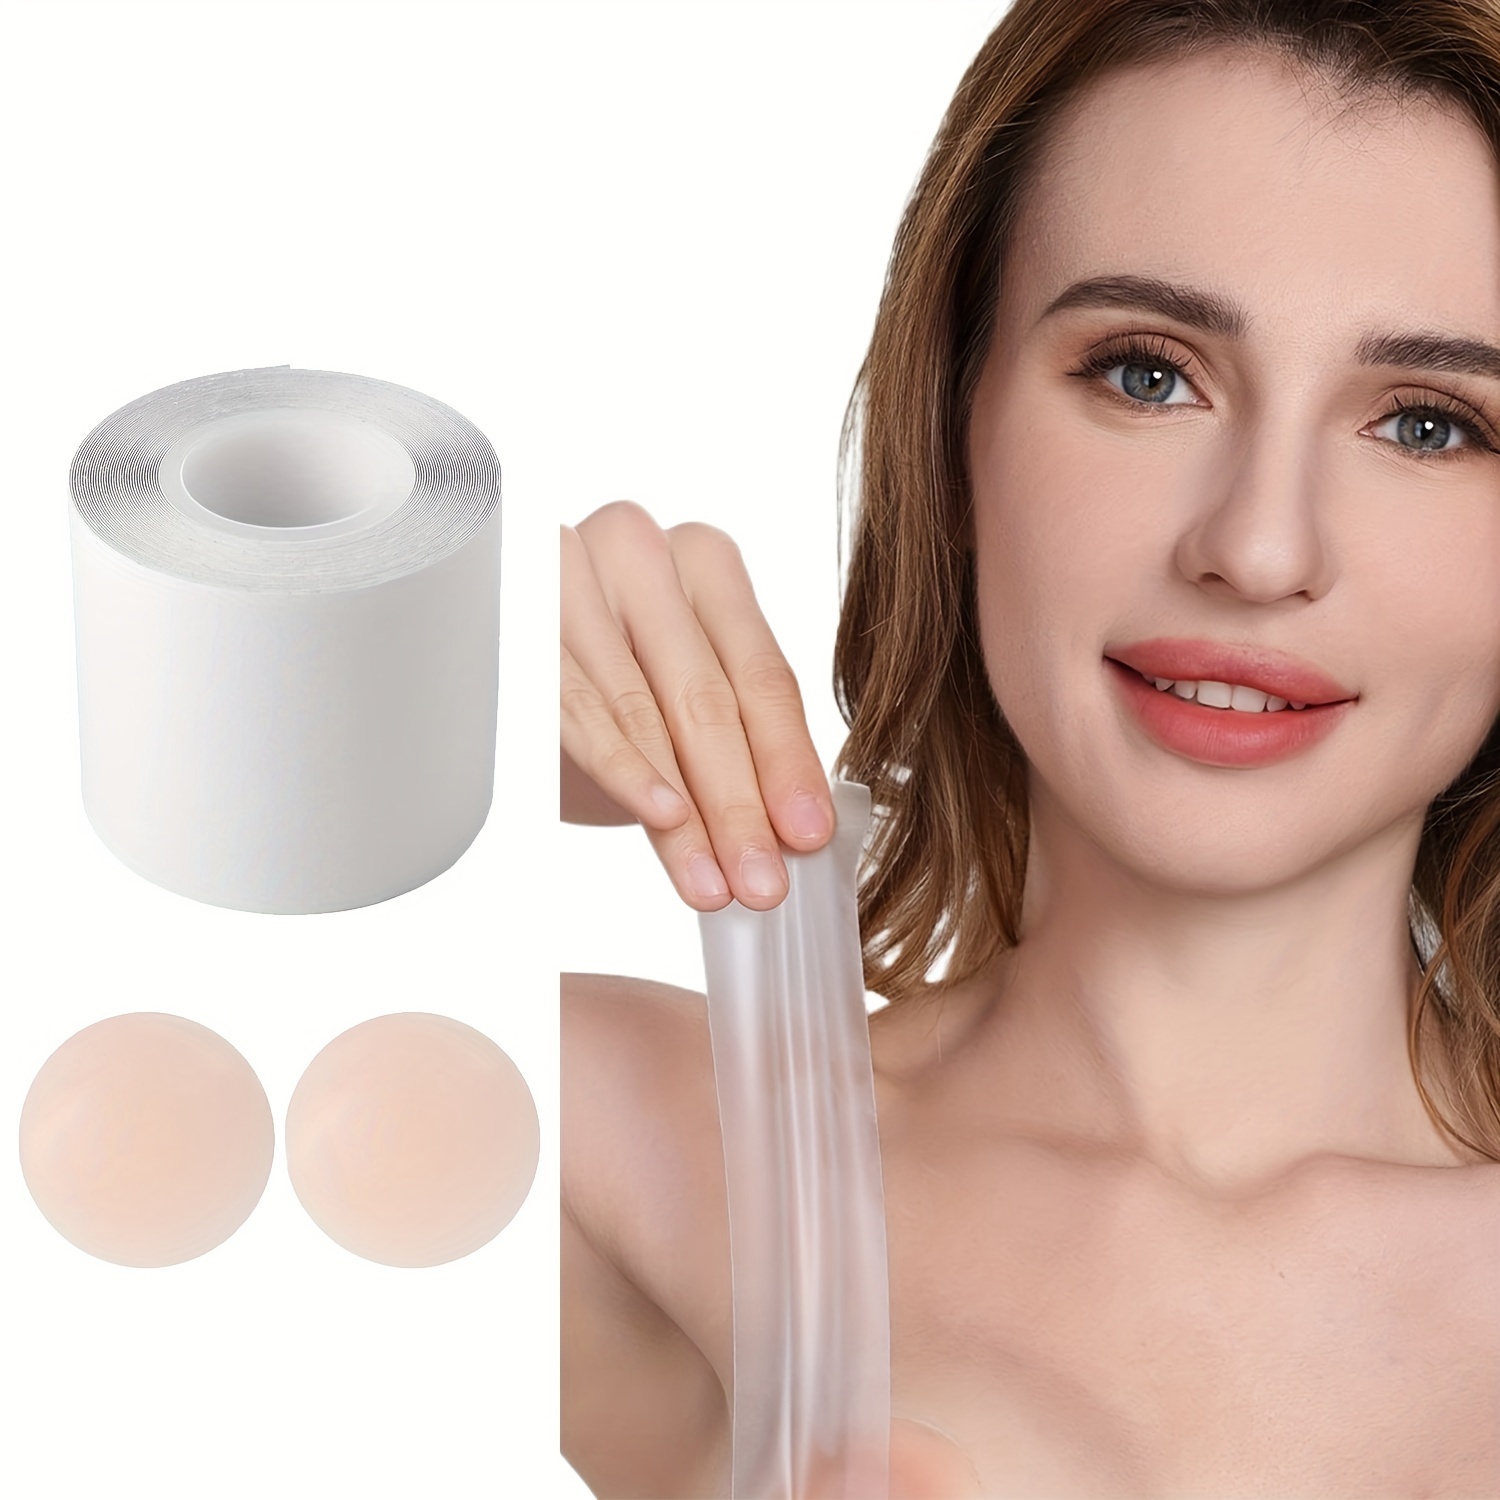 Breast Tape Breast Lift Tape Adhesive Bra Nipple Covers, A-g Cups